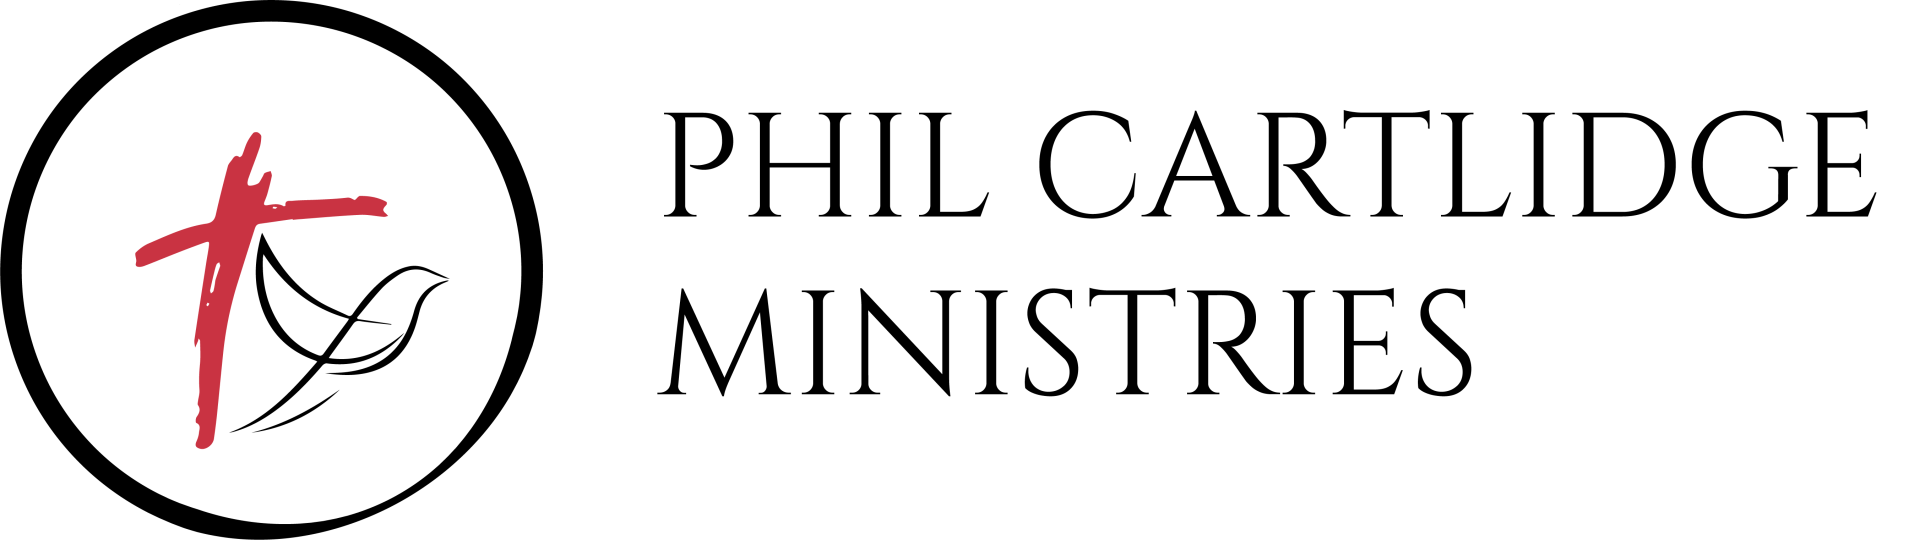 Welcome to Phil Cartlidge Ministries